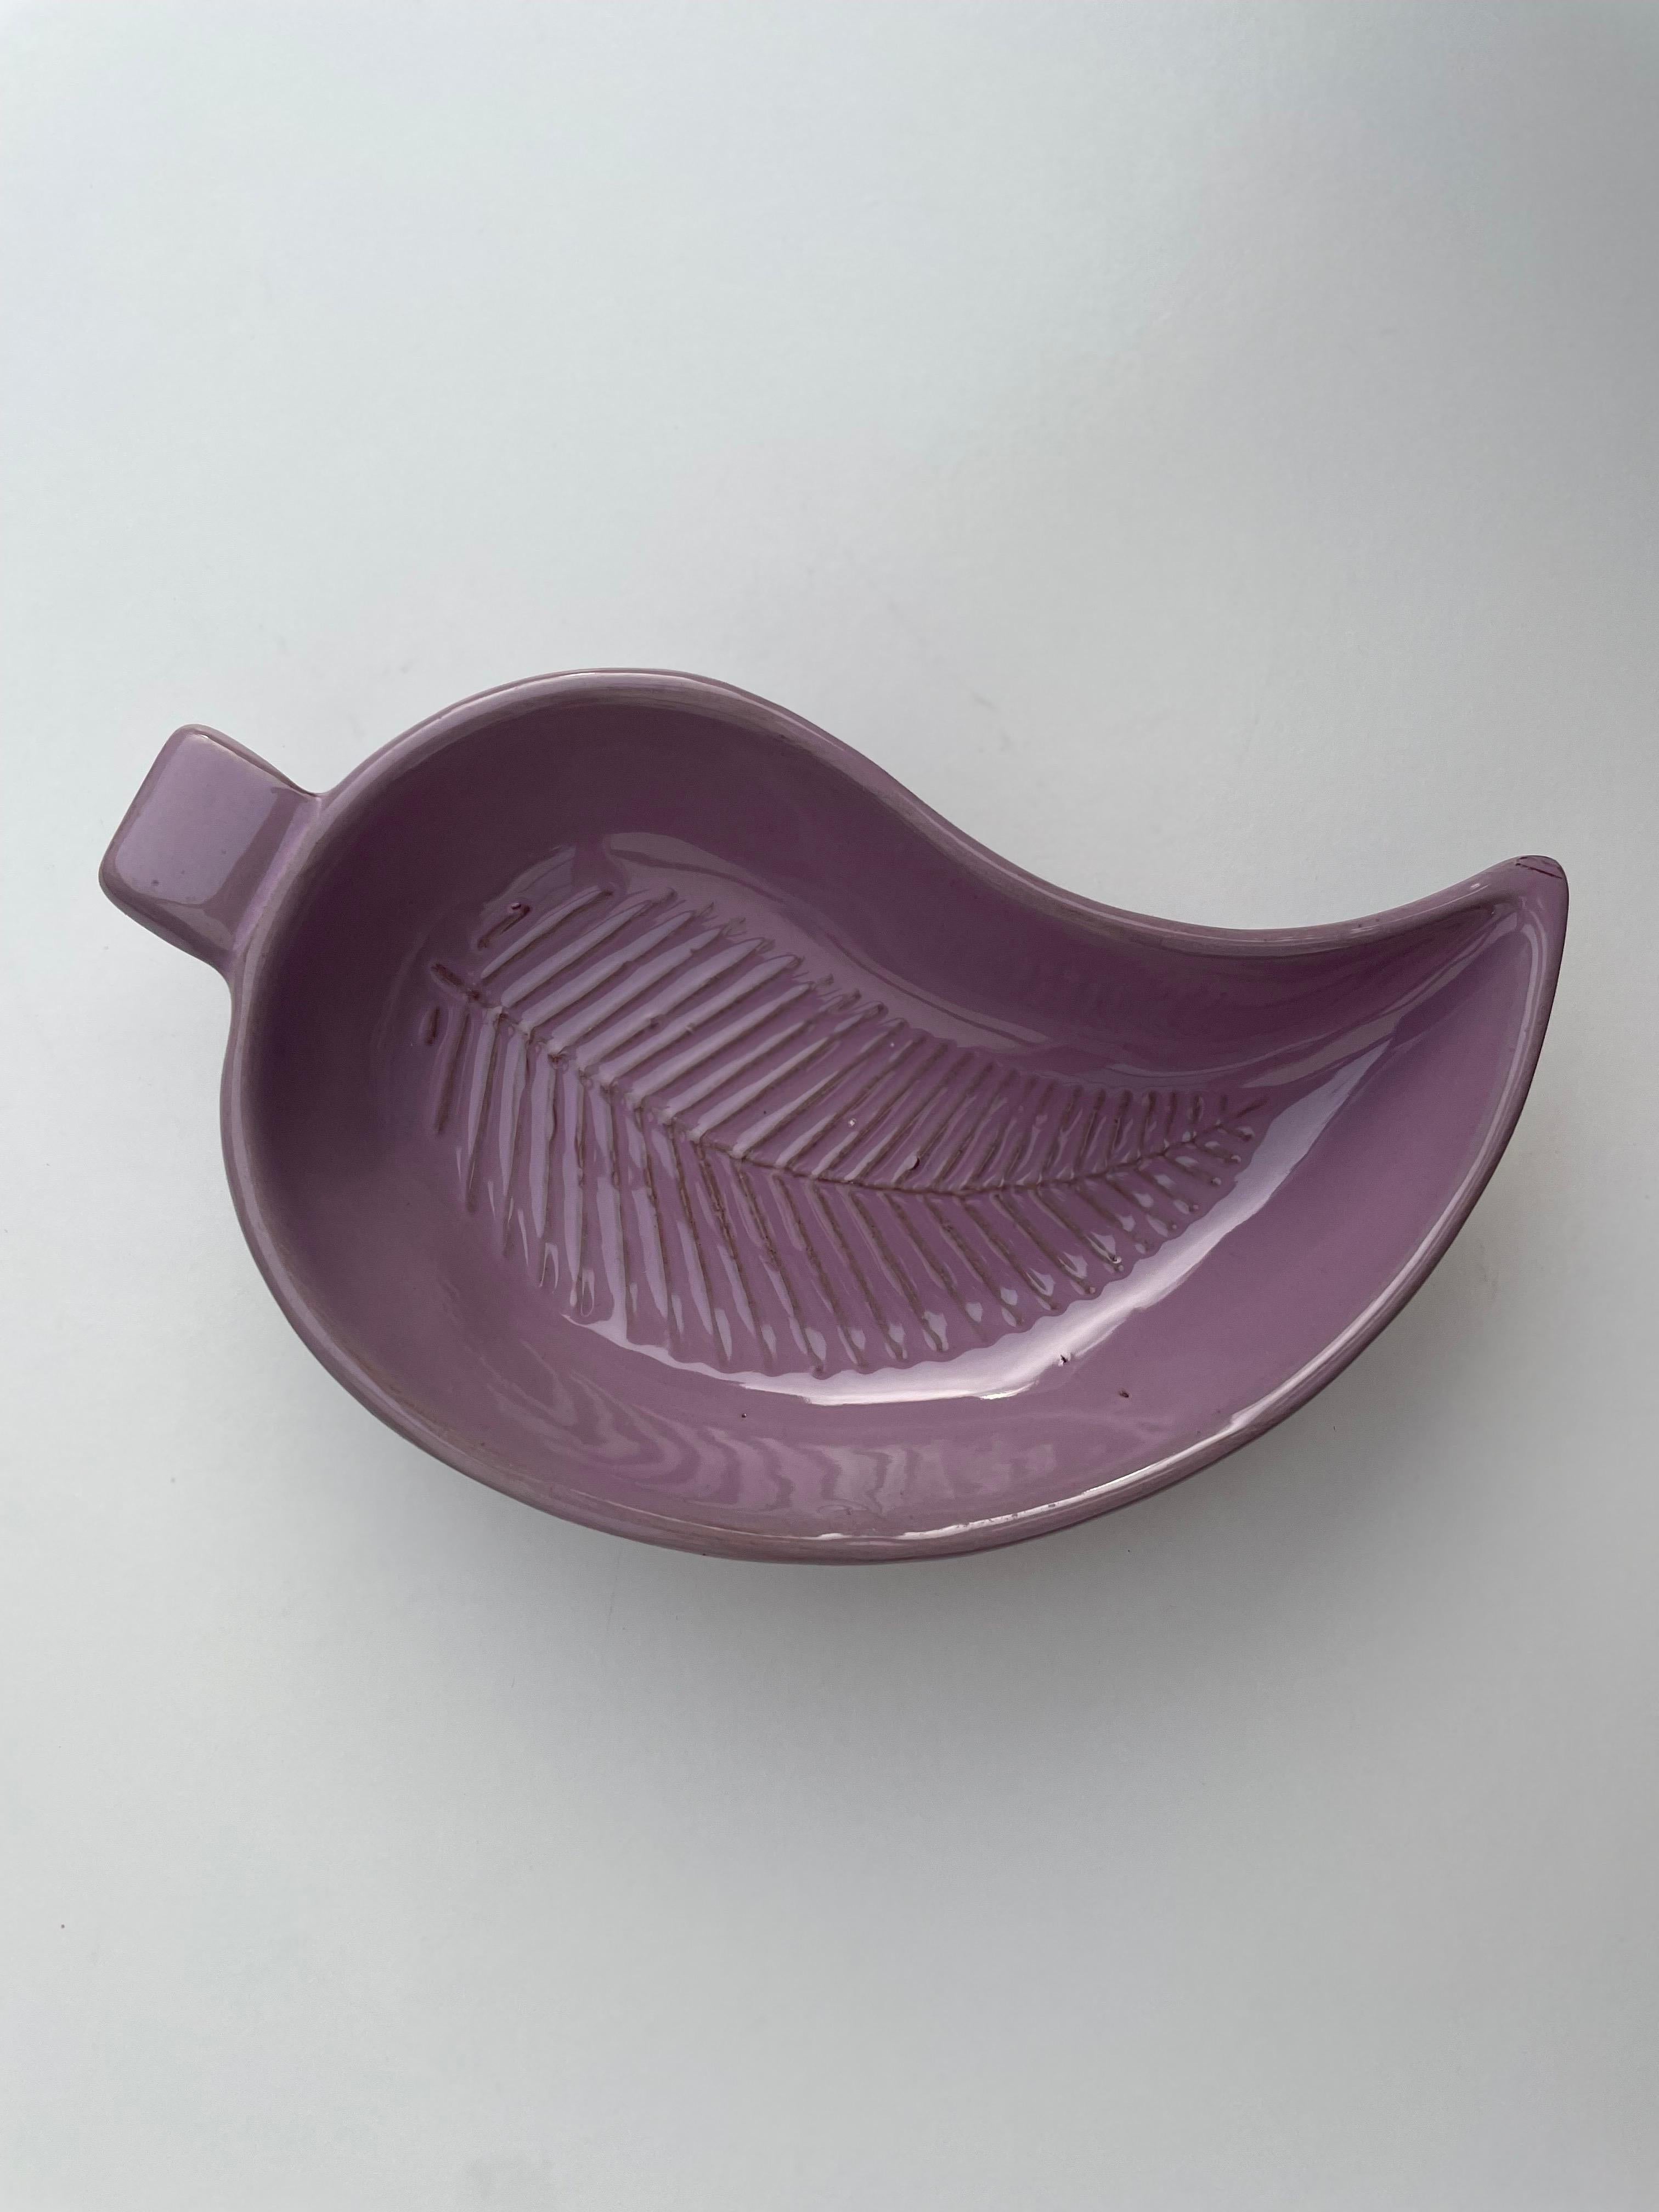 Handmade leaf shaped vide poche. Thick lilac glaze over lined relief pattern. Small square shaped handle on asymmetrical bowl form with pointy end. Numbered under base. Great vintage condition. 
Scandinavia, 1960s. 